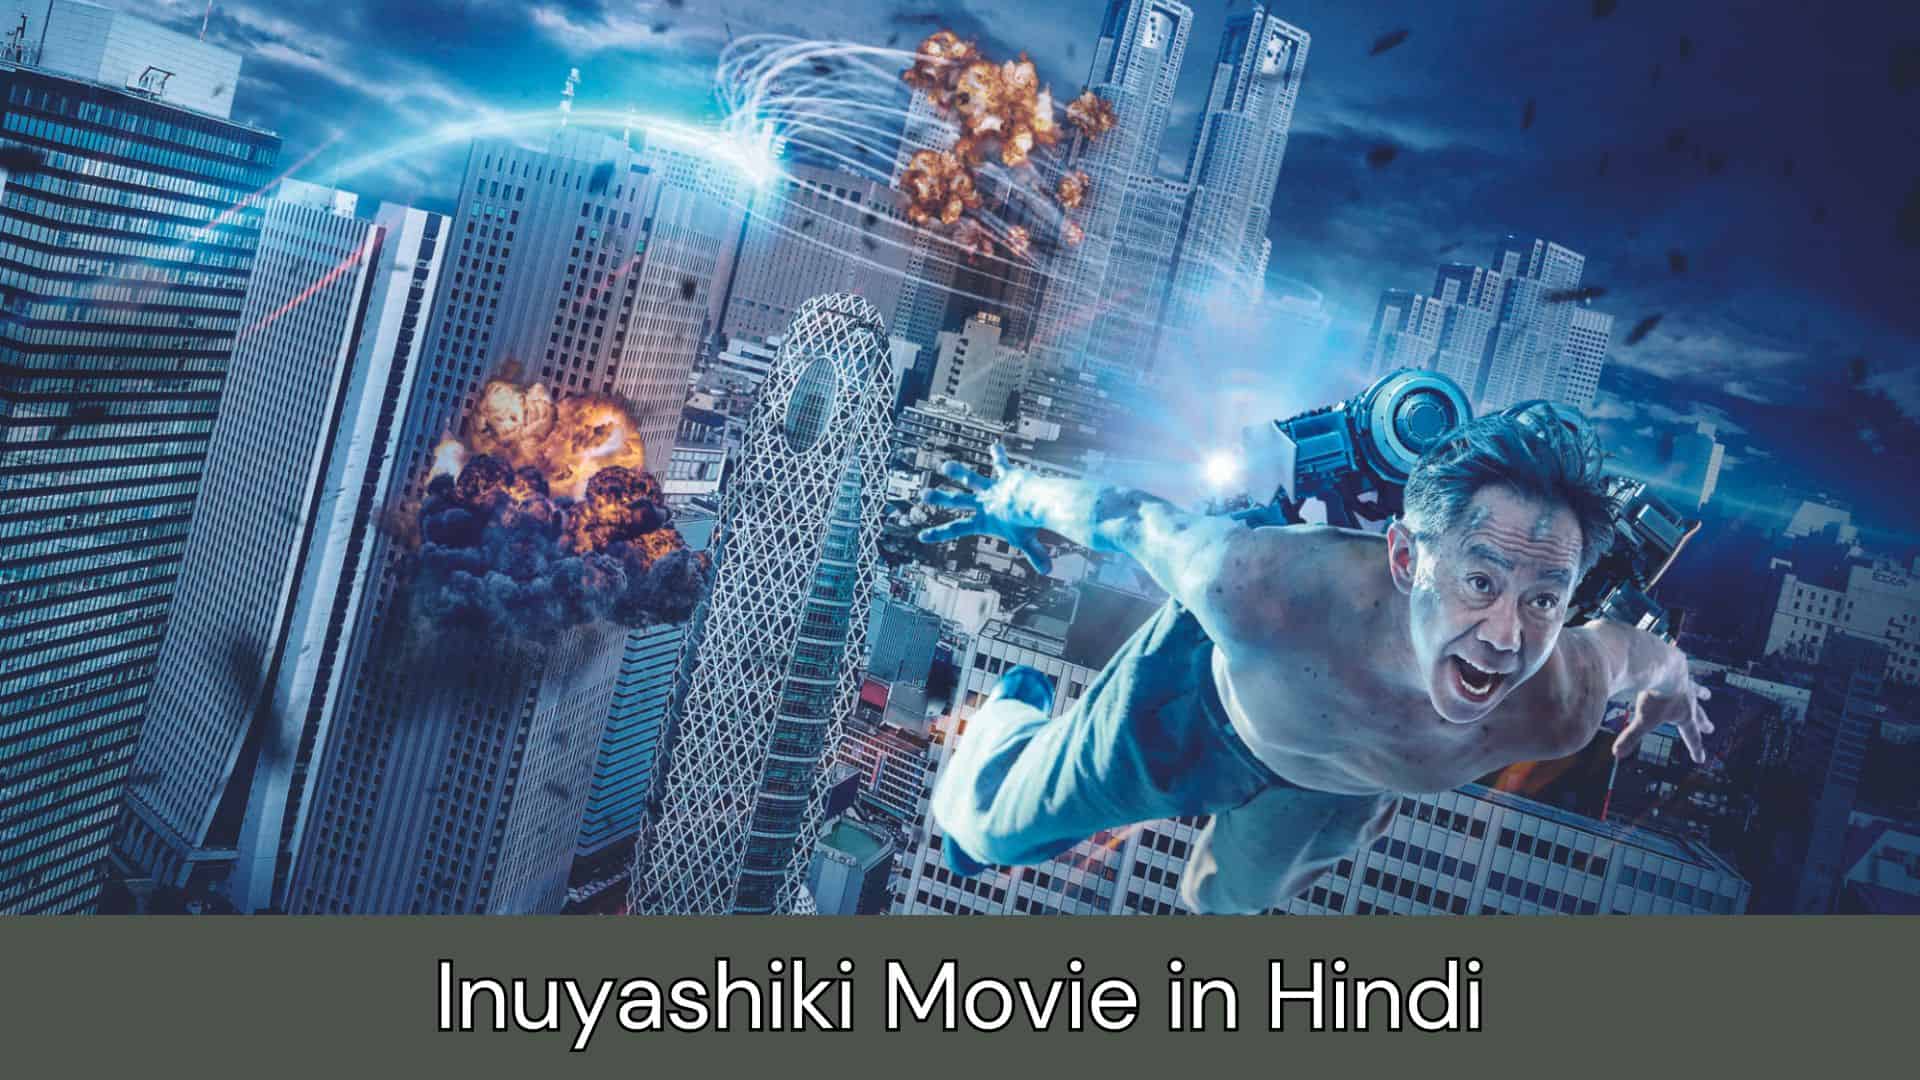 Inuyashiki Movie Cast, Trailer, Where To Watch, Release Date